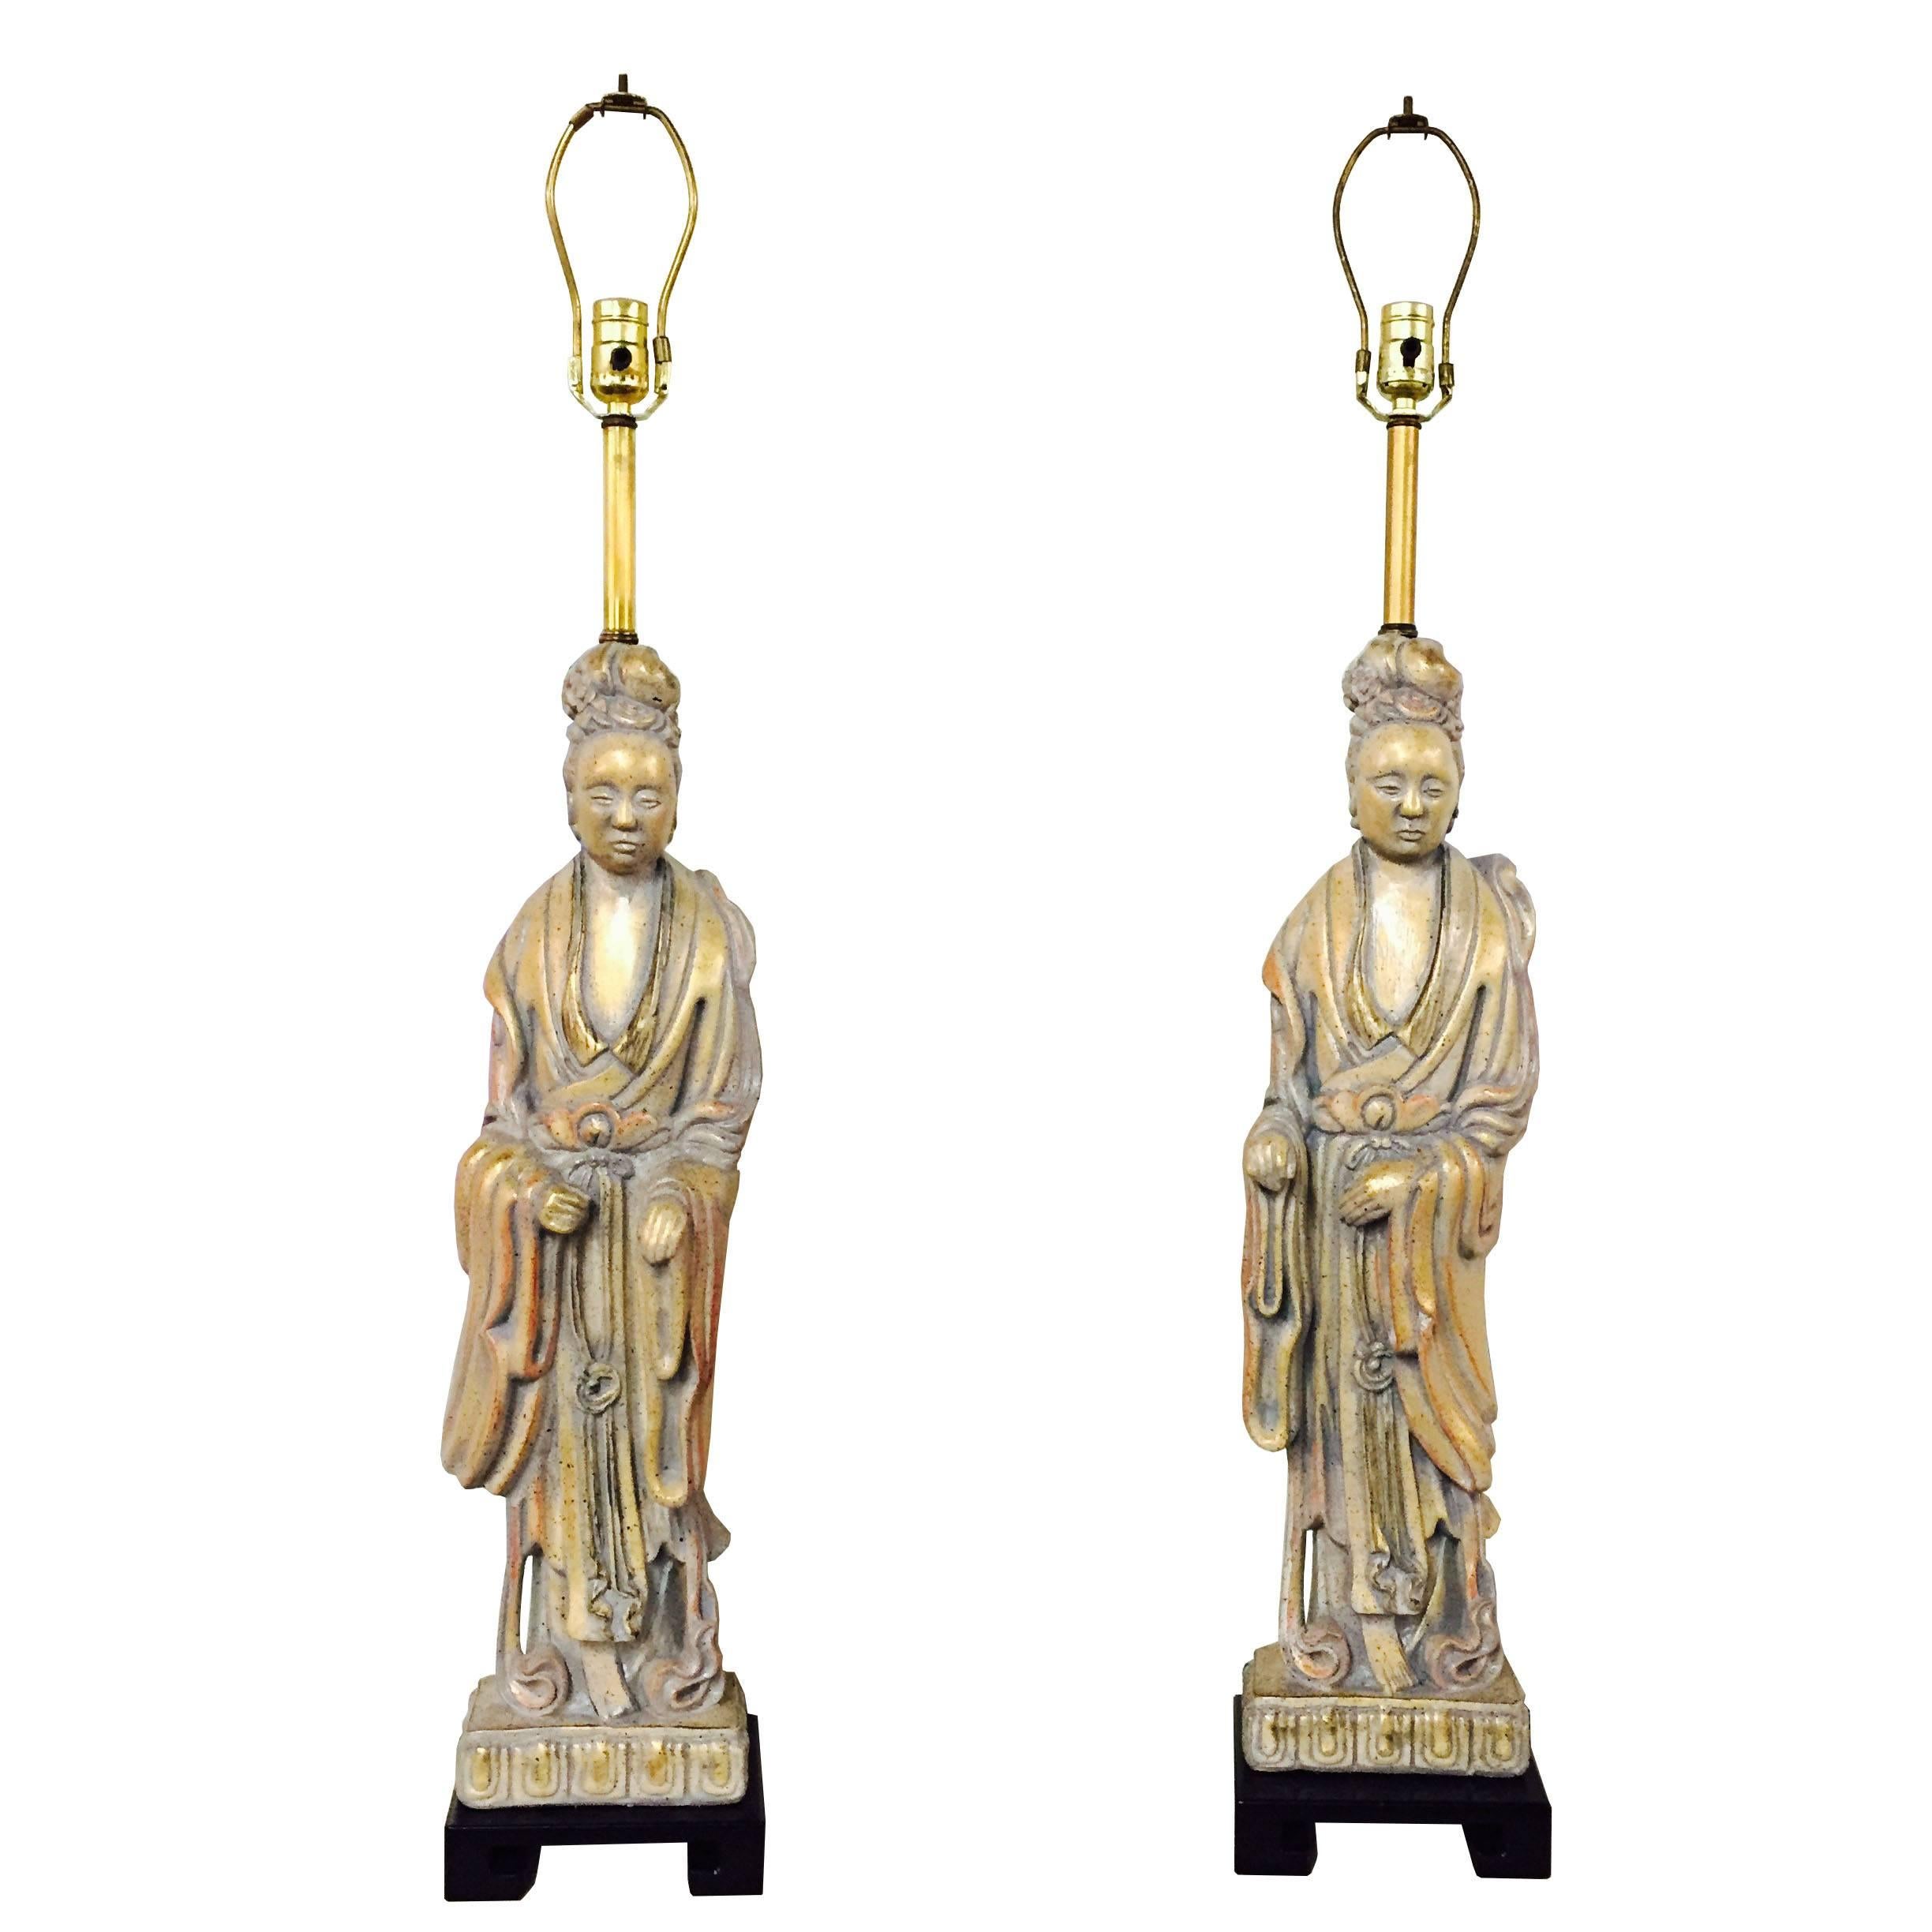 Pair of 1940s Quan Yin table lamps by Frederick Cooper.

Dimensions: 7.5